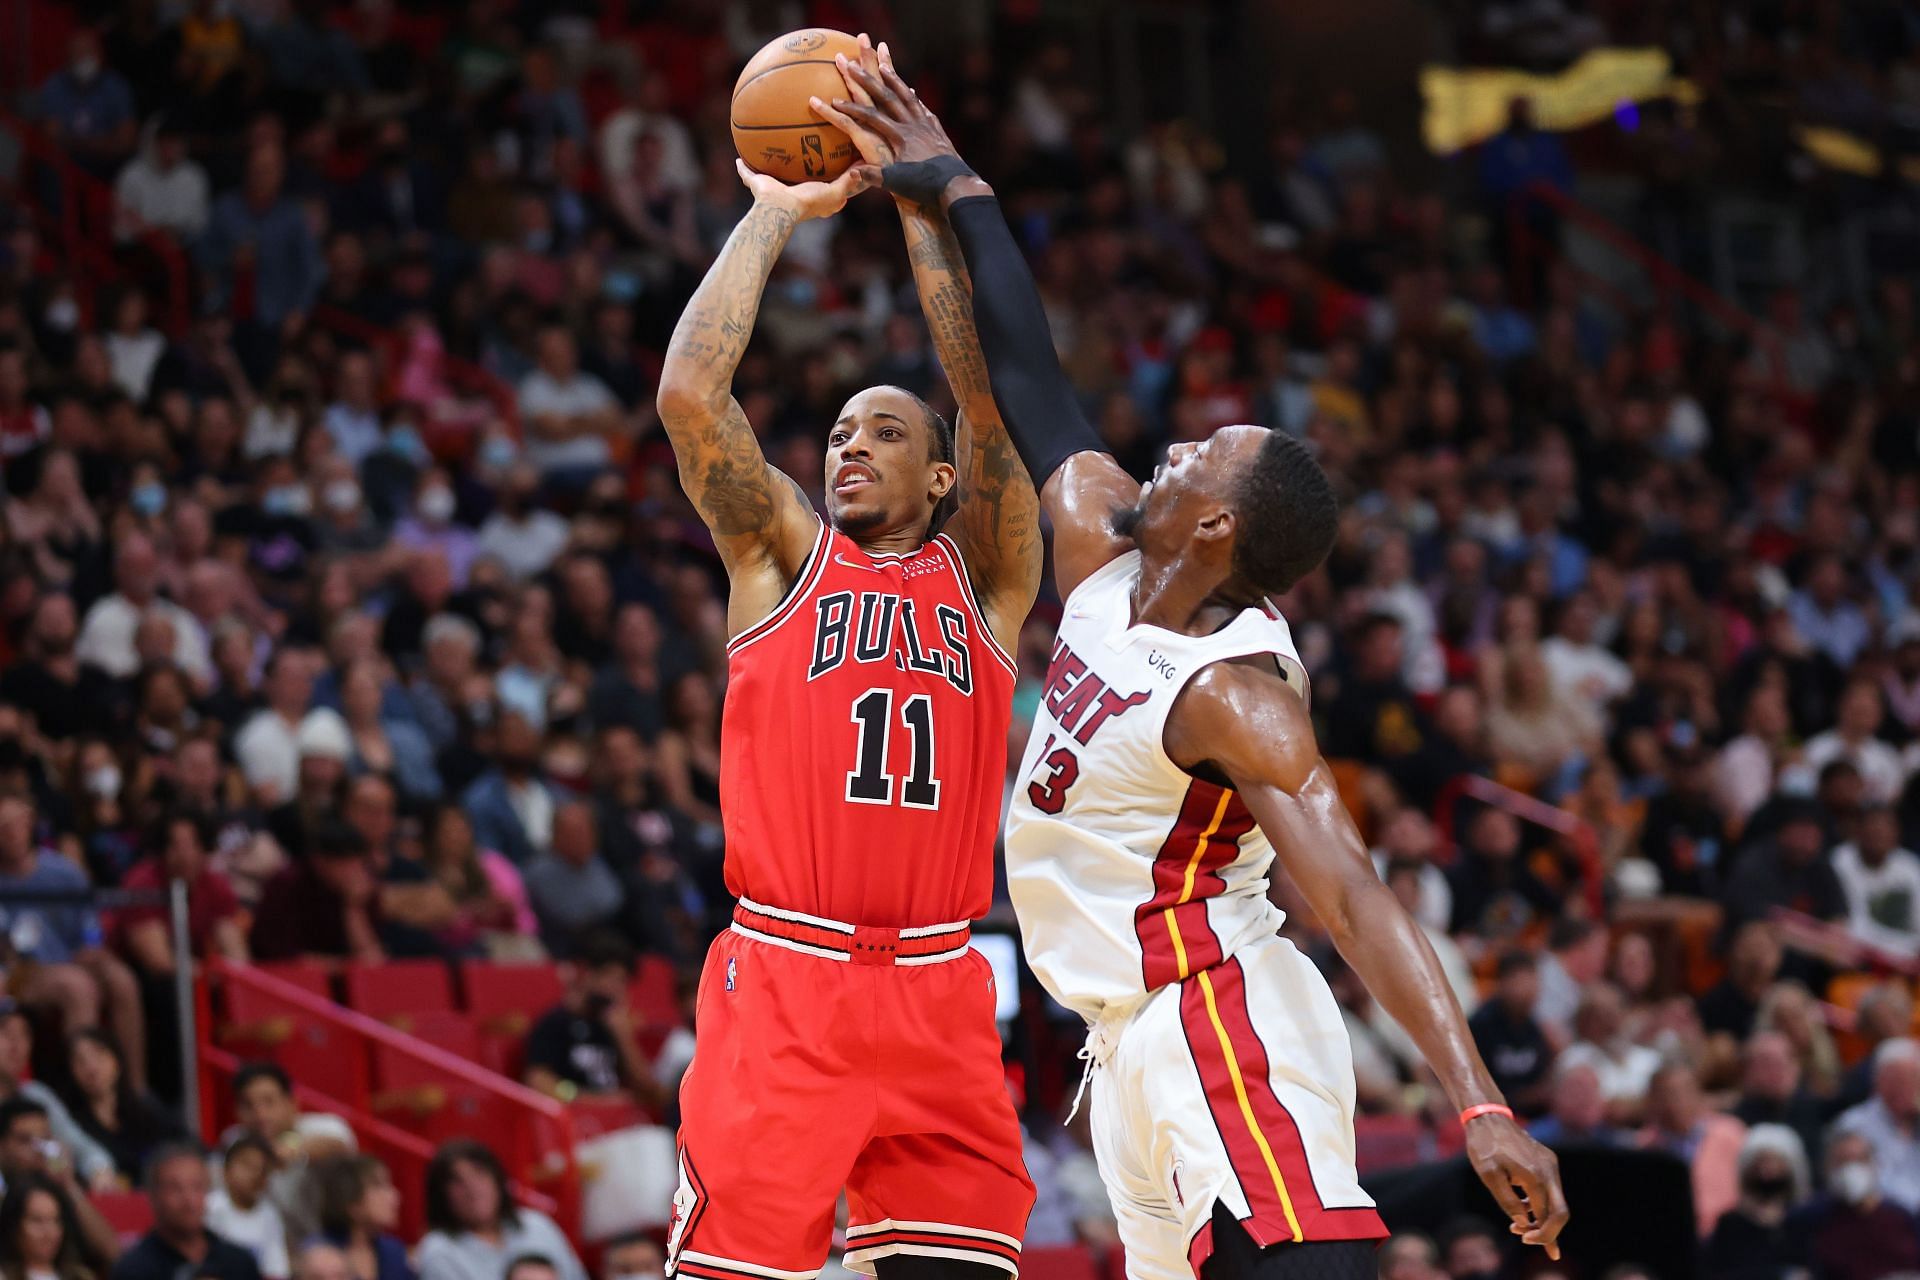 Chicago Bulls will face the Miami Heat at the United Center on Saturday.